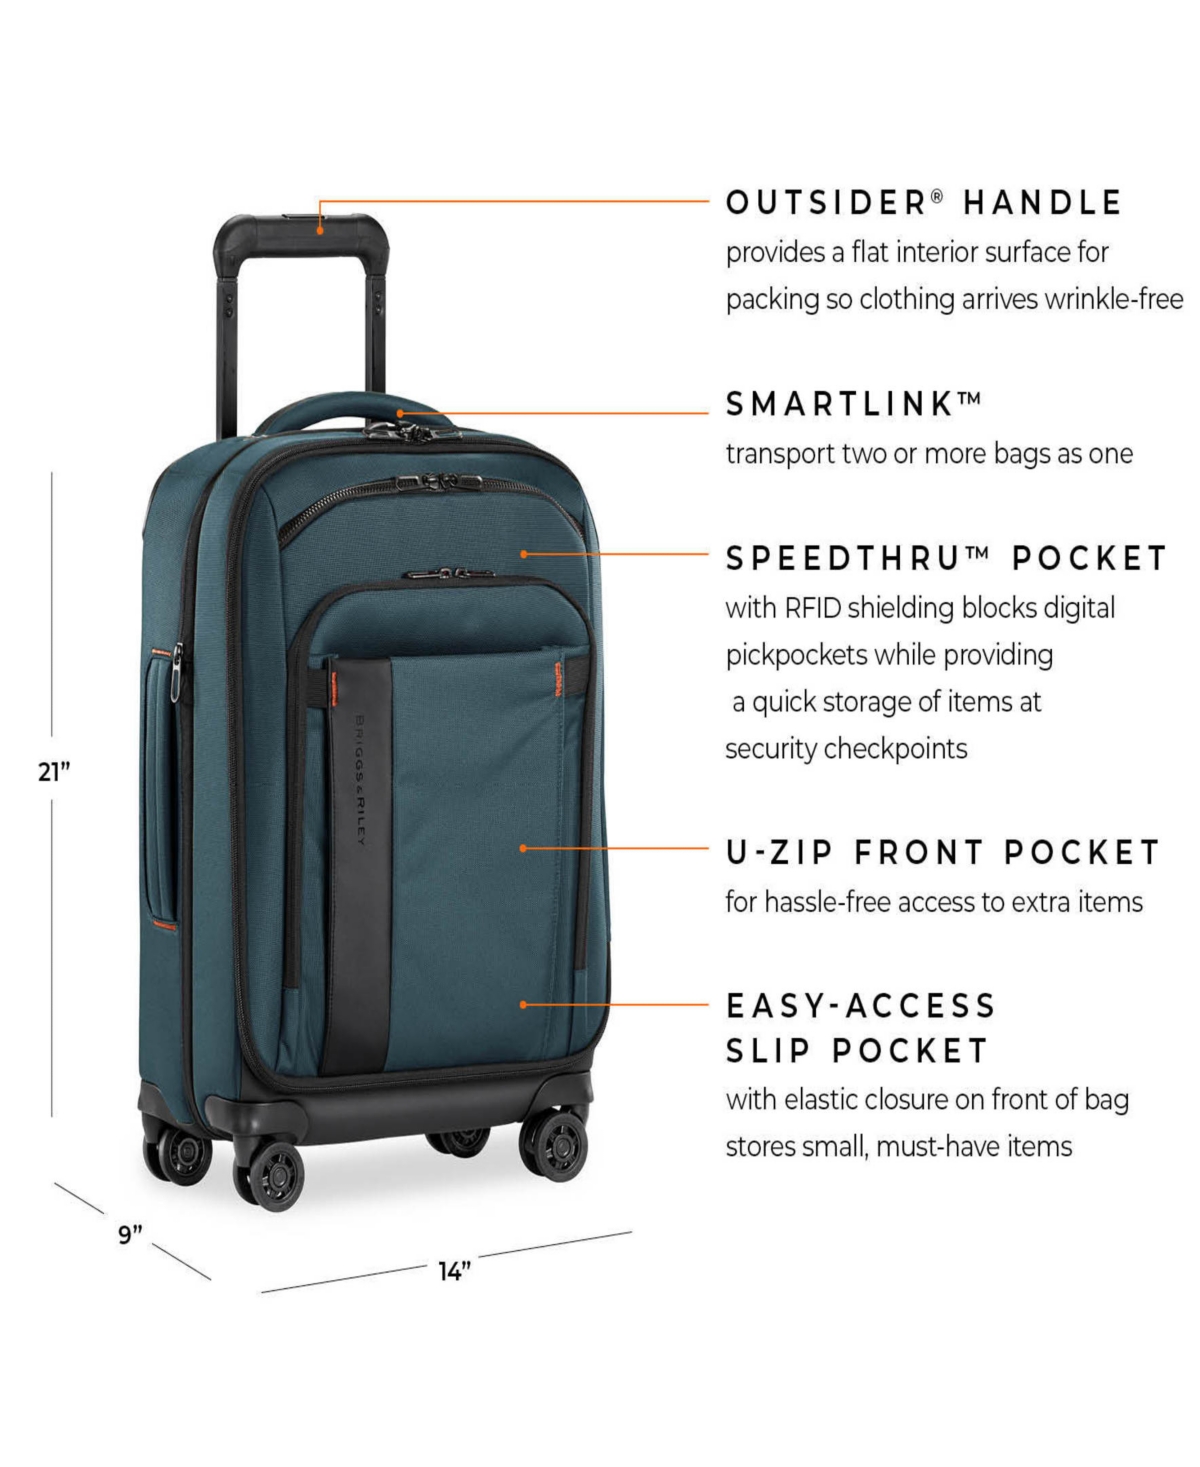 Zdx 21" Carry-on Expandable Spinner - Ocean